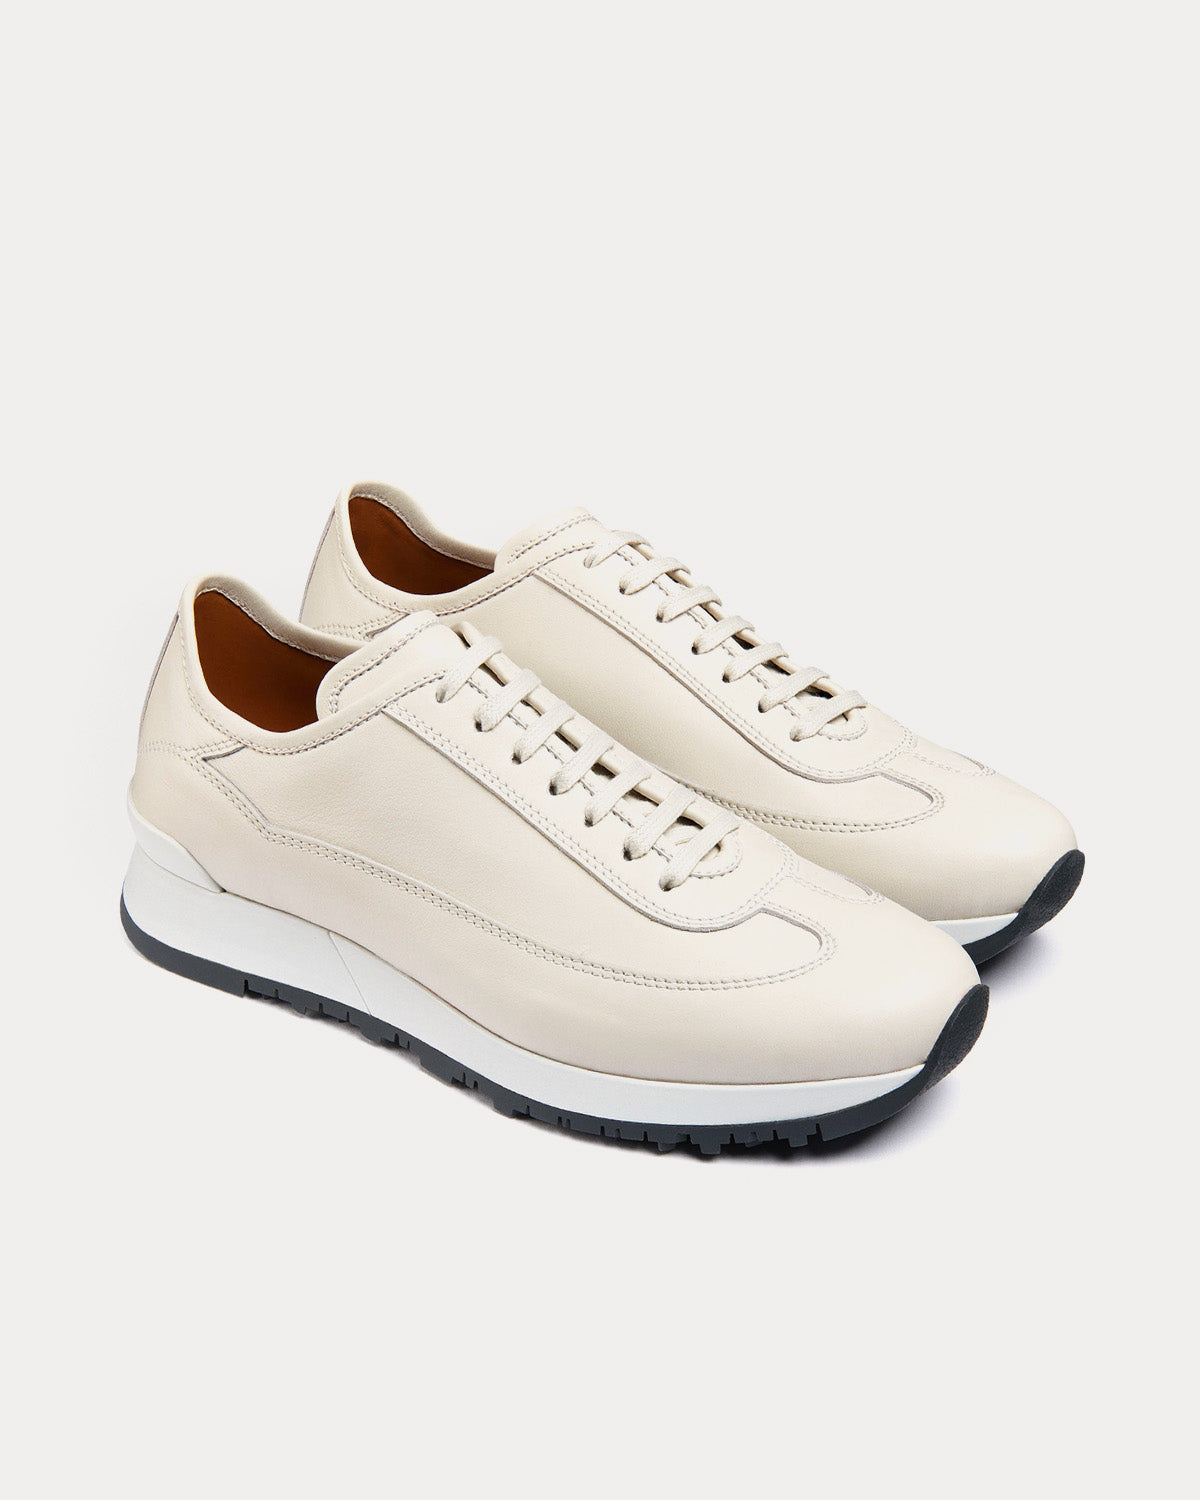 John Lobb - Foundry II Natural Calf Leather Off-White Low Top Sneakers